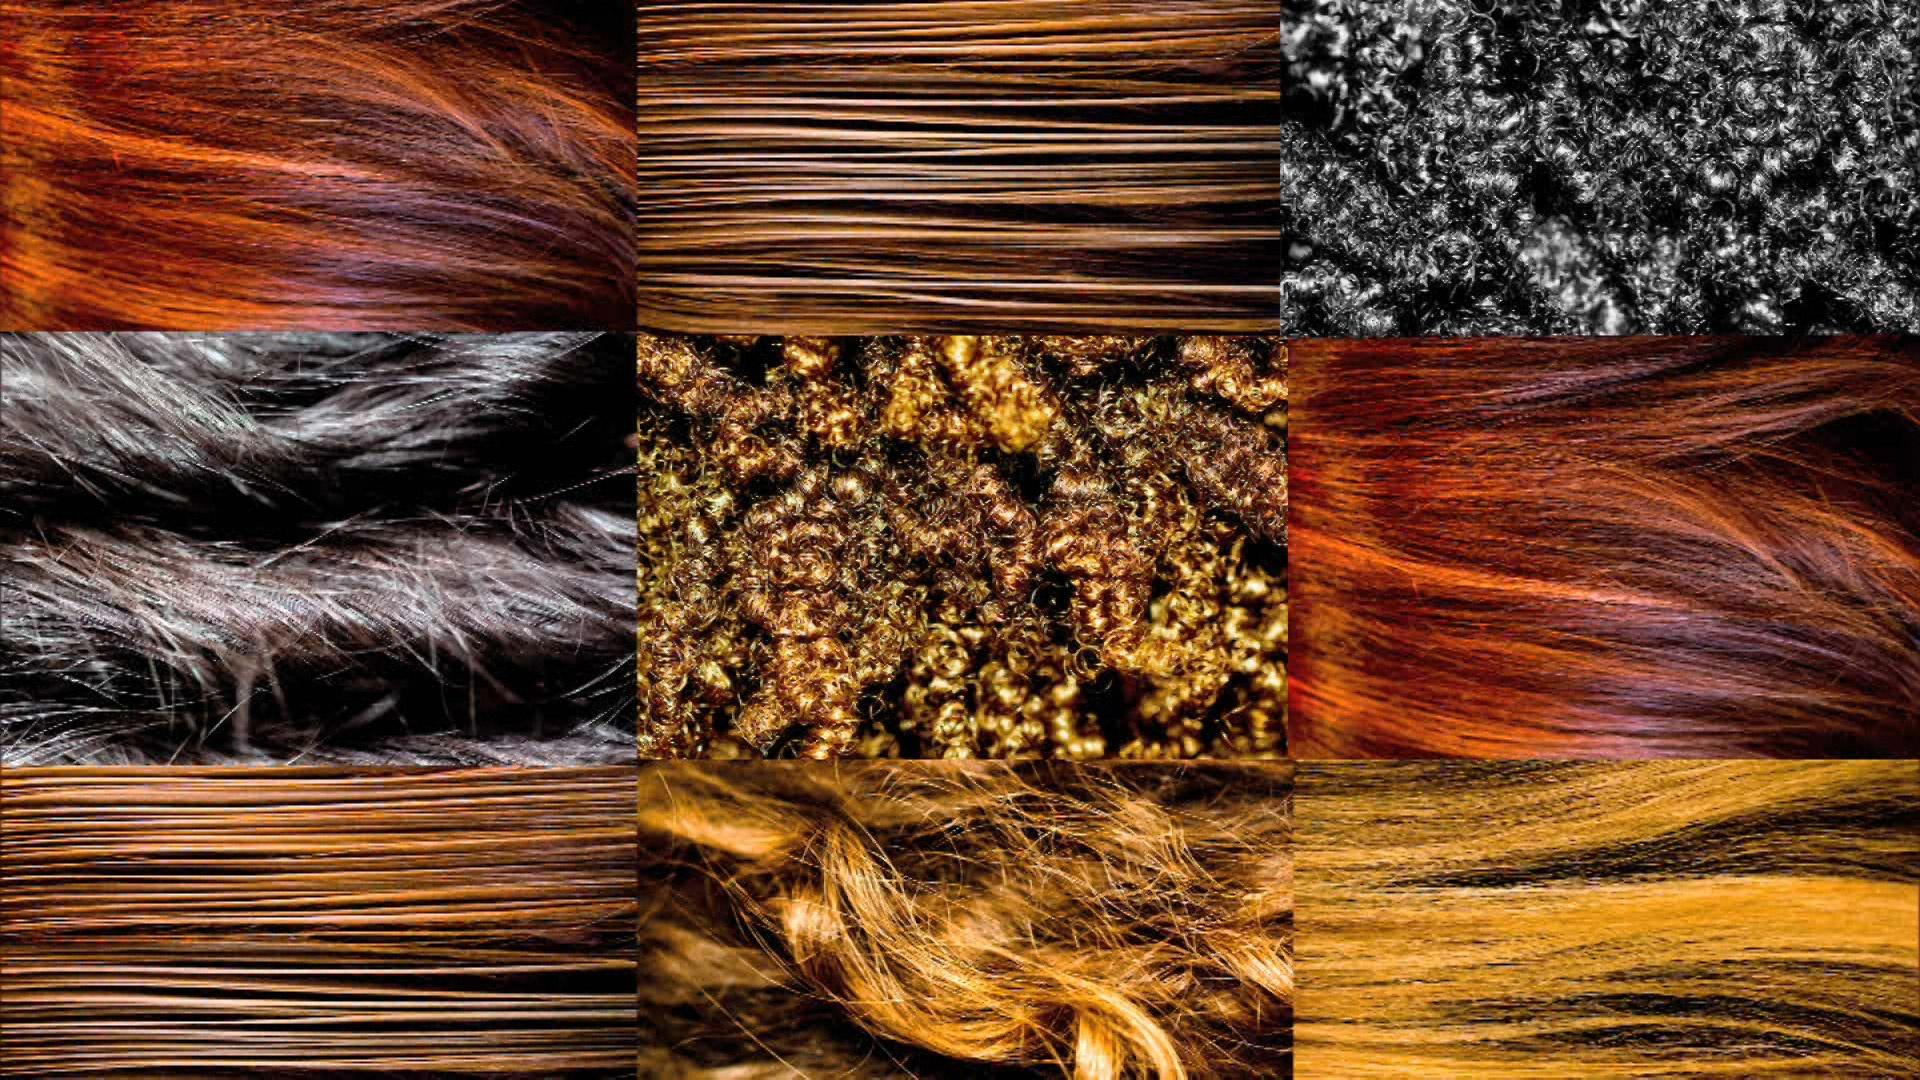 Composite of nine images of different types of hair.